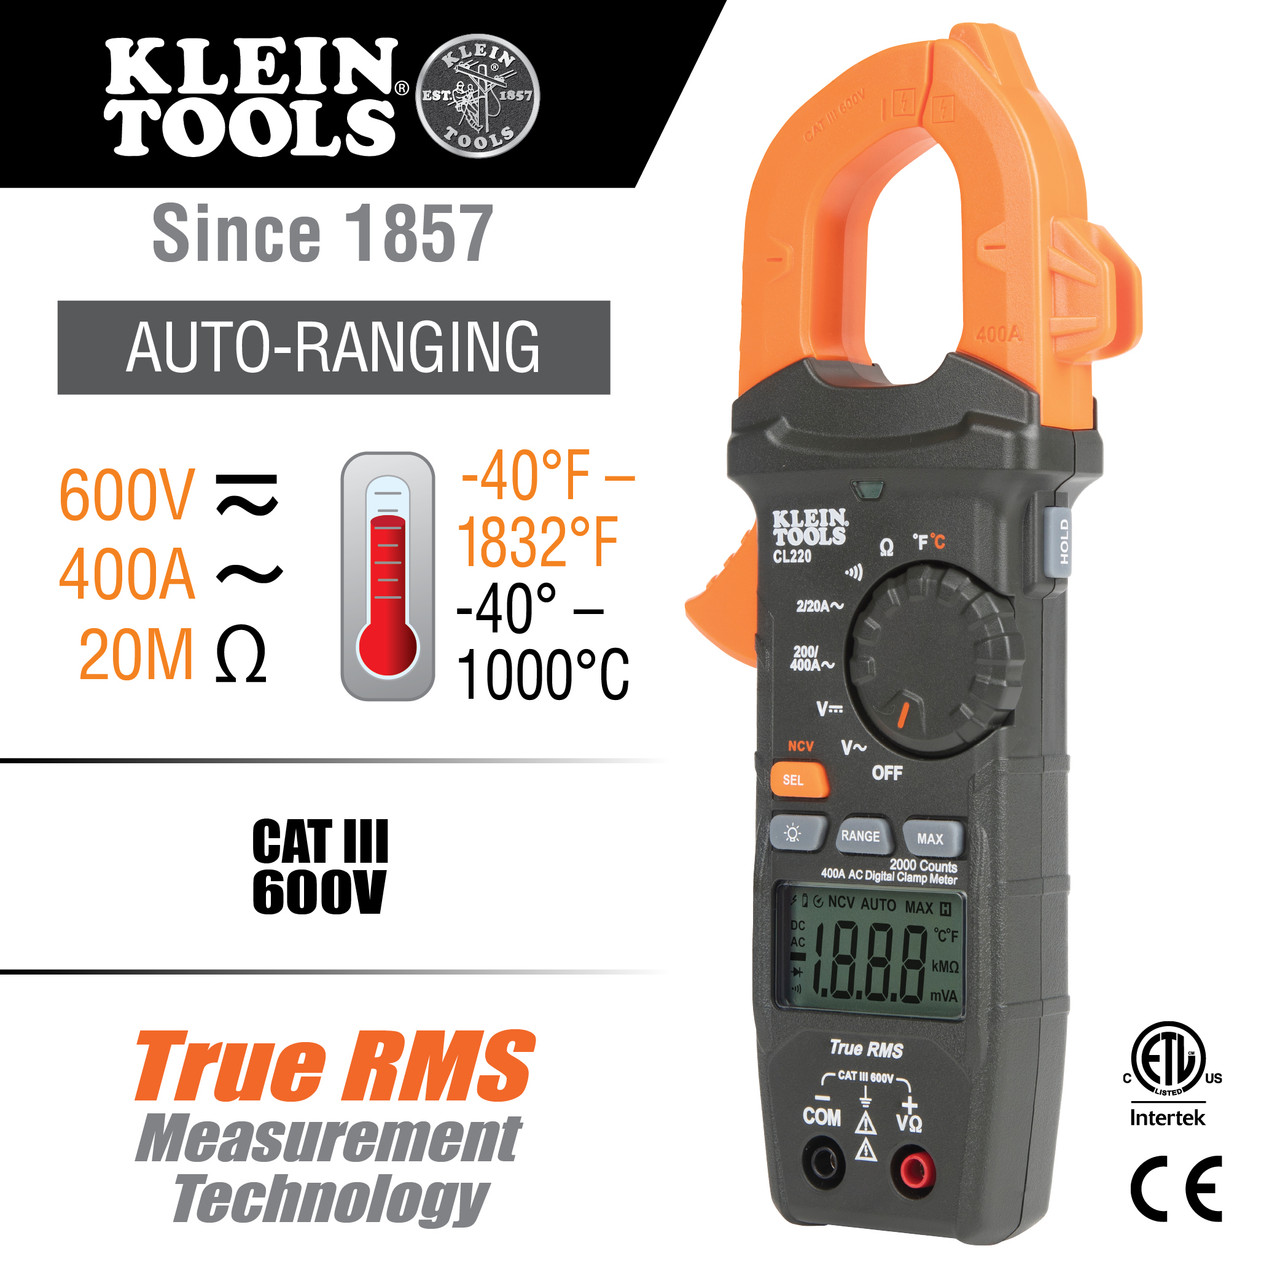 Digital Clamp Meter, AC Auto-Ranging 400 Amp with Temp *** Black Friday Special ***